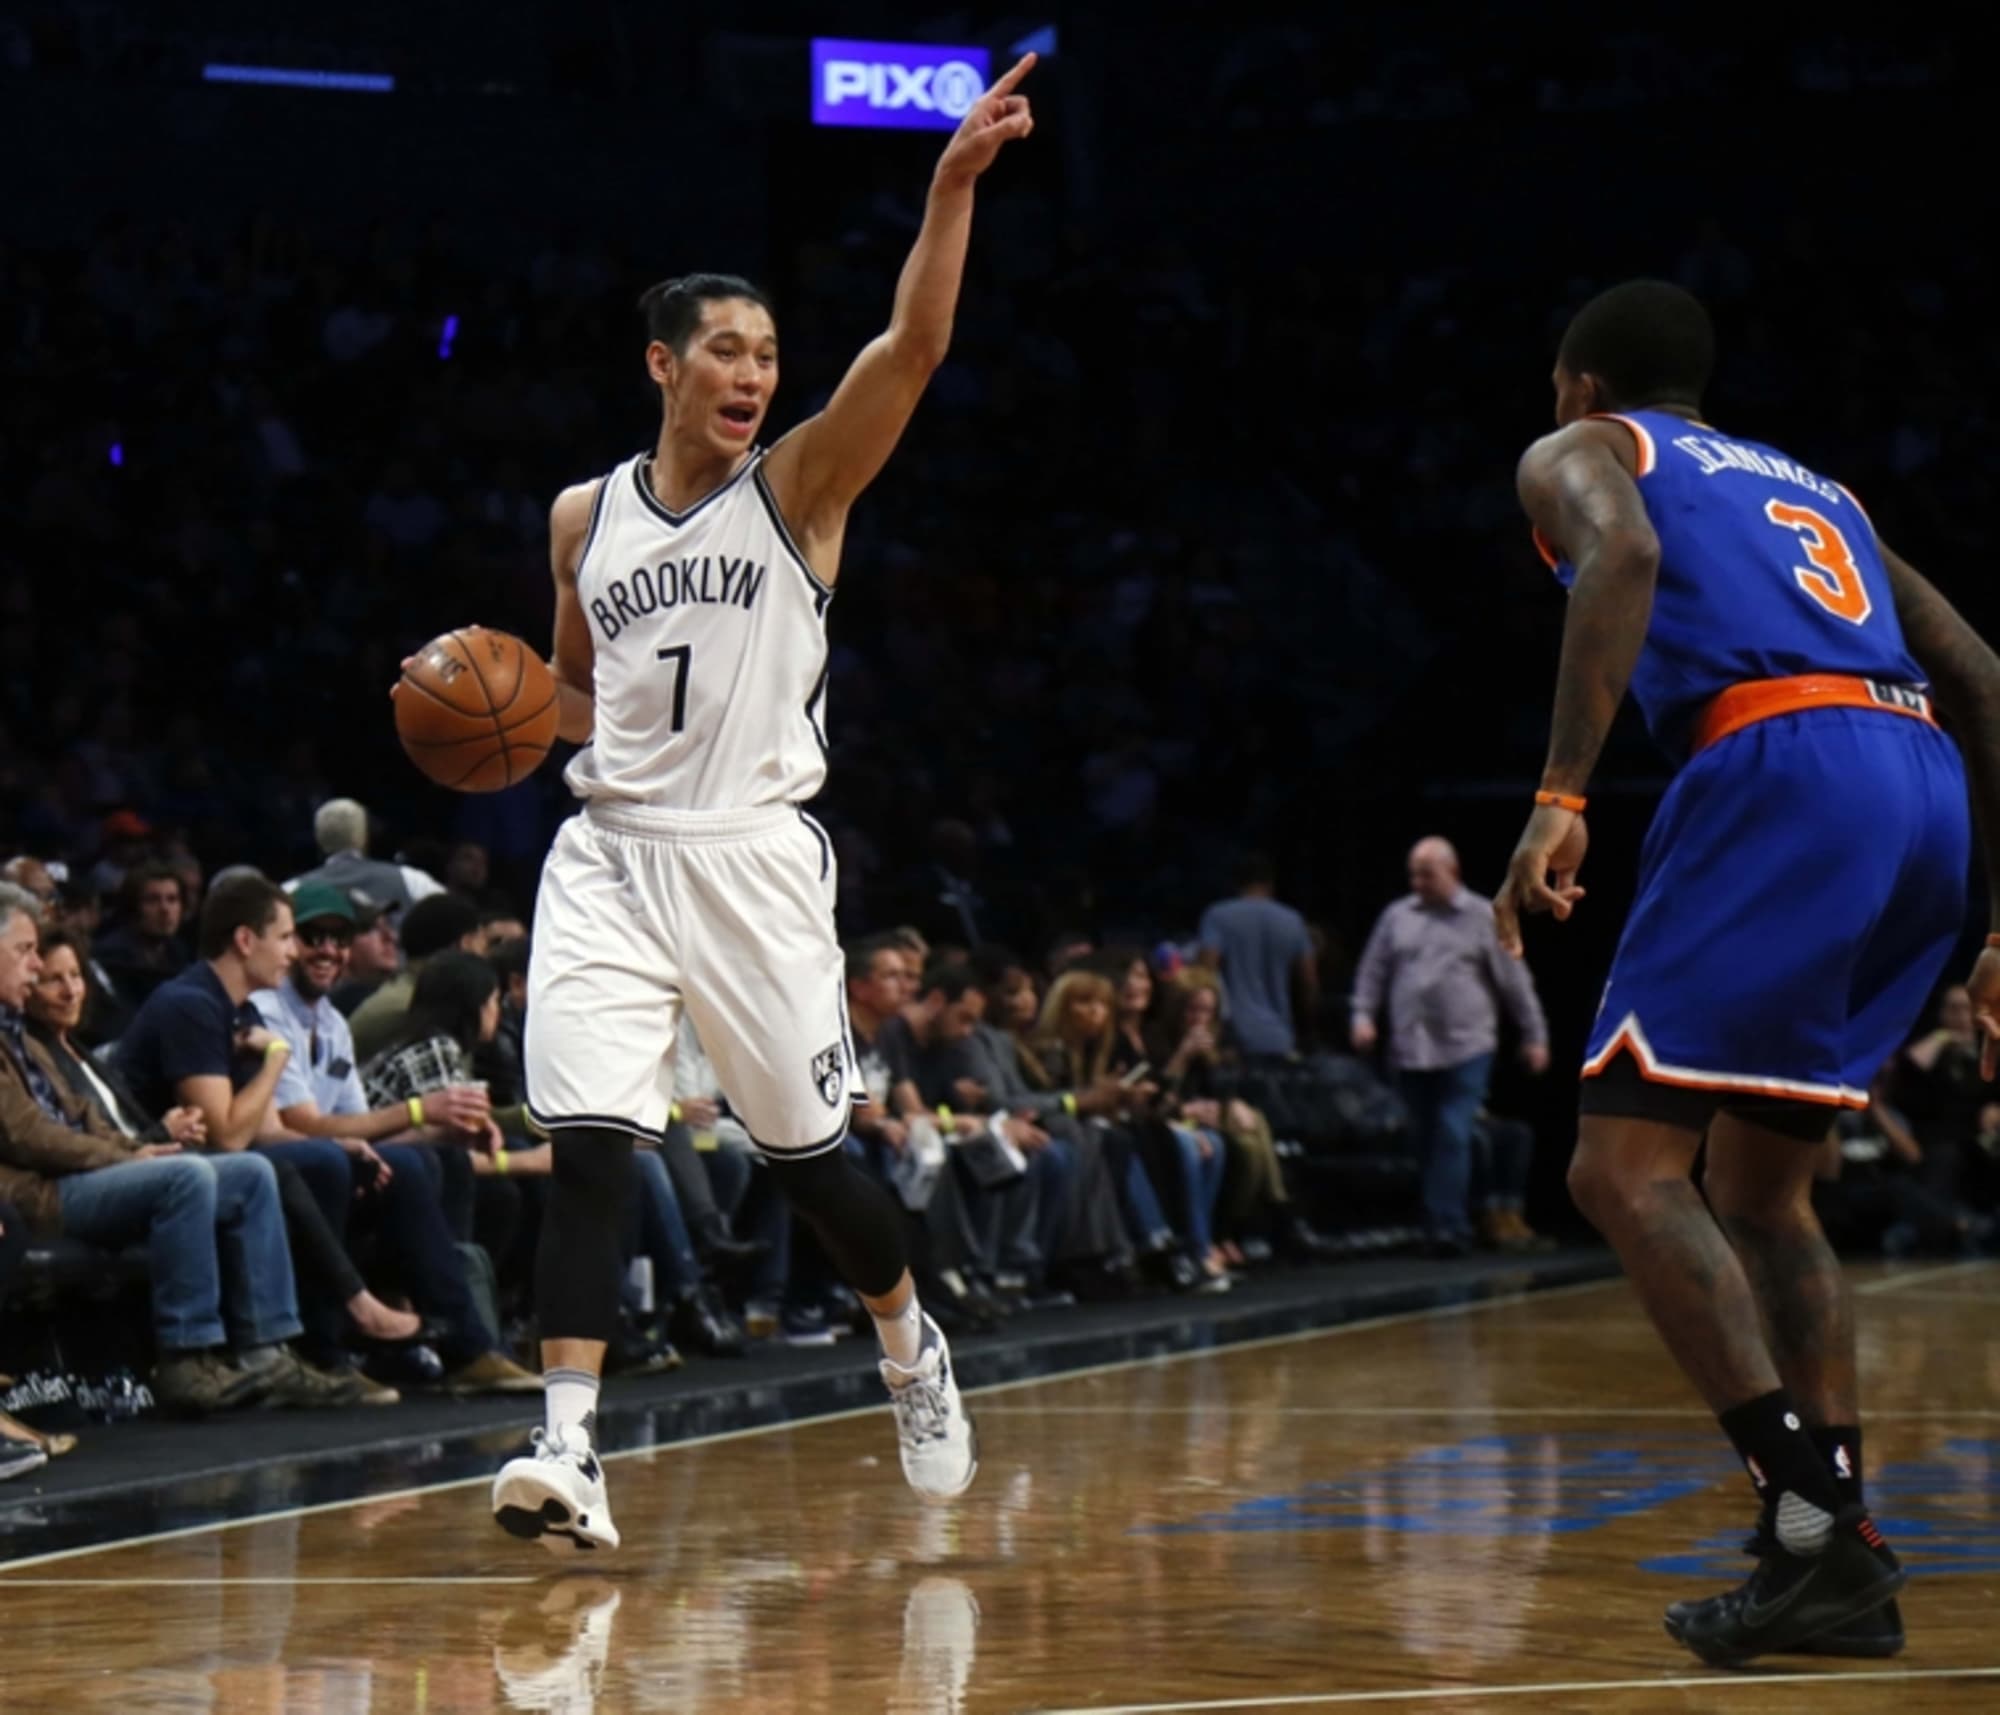 Jeremy Lin has NBA's top-selling jersey for 2011-2012 regular